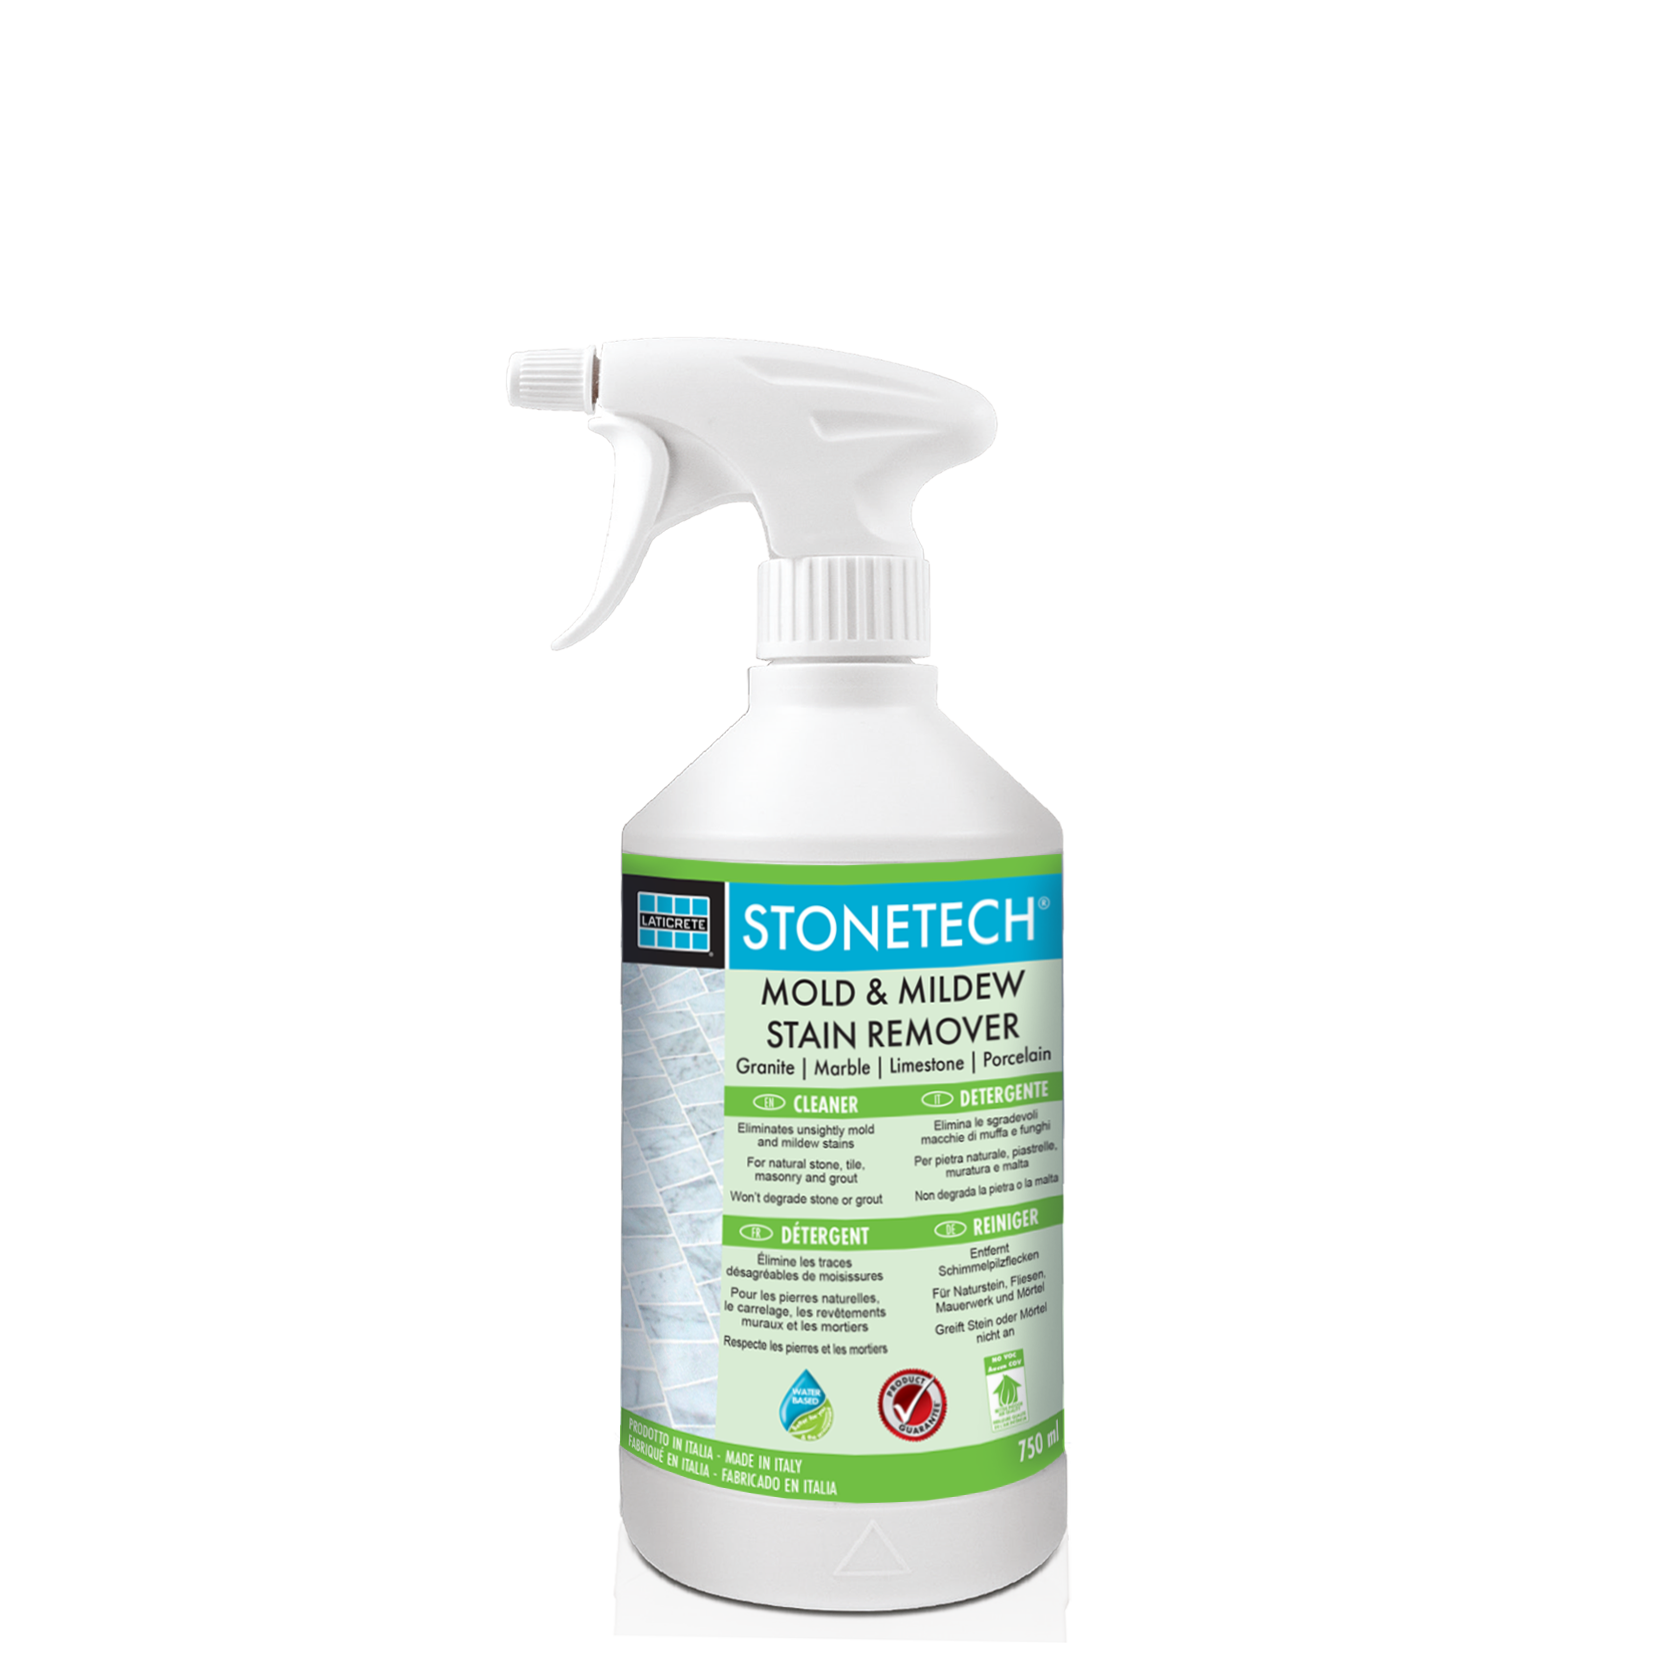 STONETECH® MOLD & MILDEW STAIN REMOVER